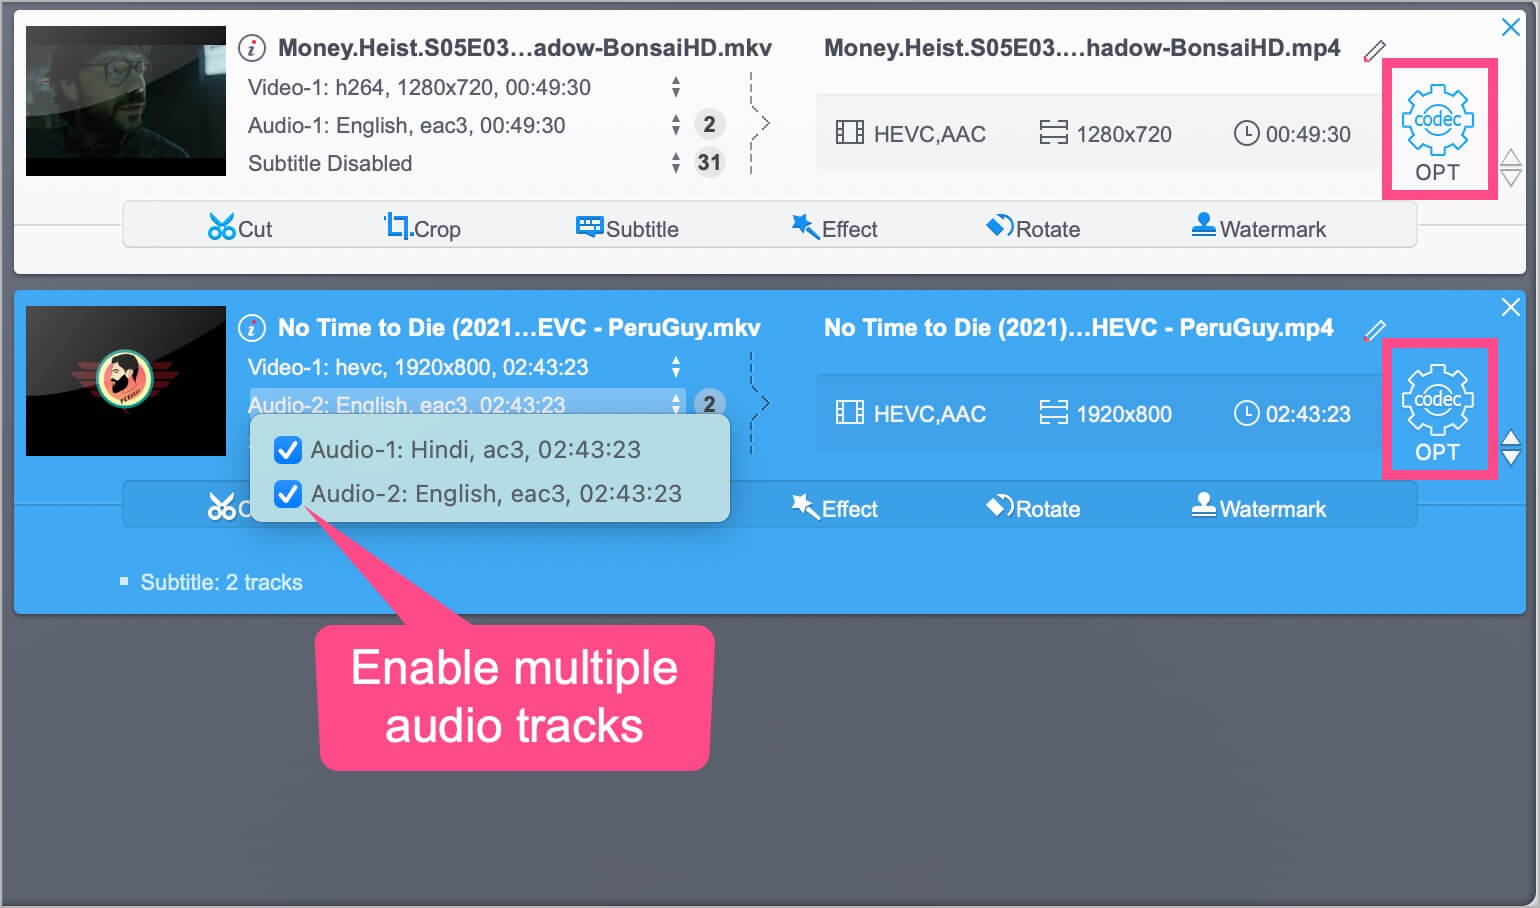 enable audio tracks and subtitles in MKV file